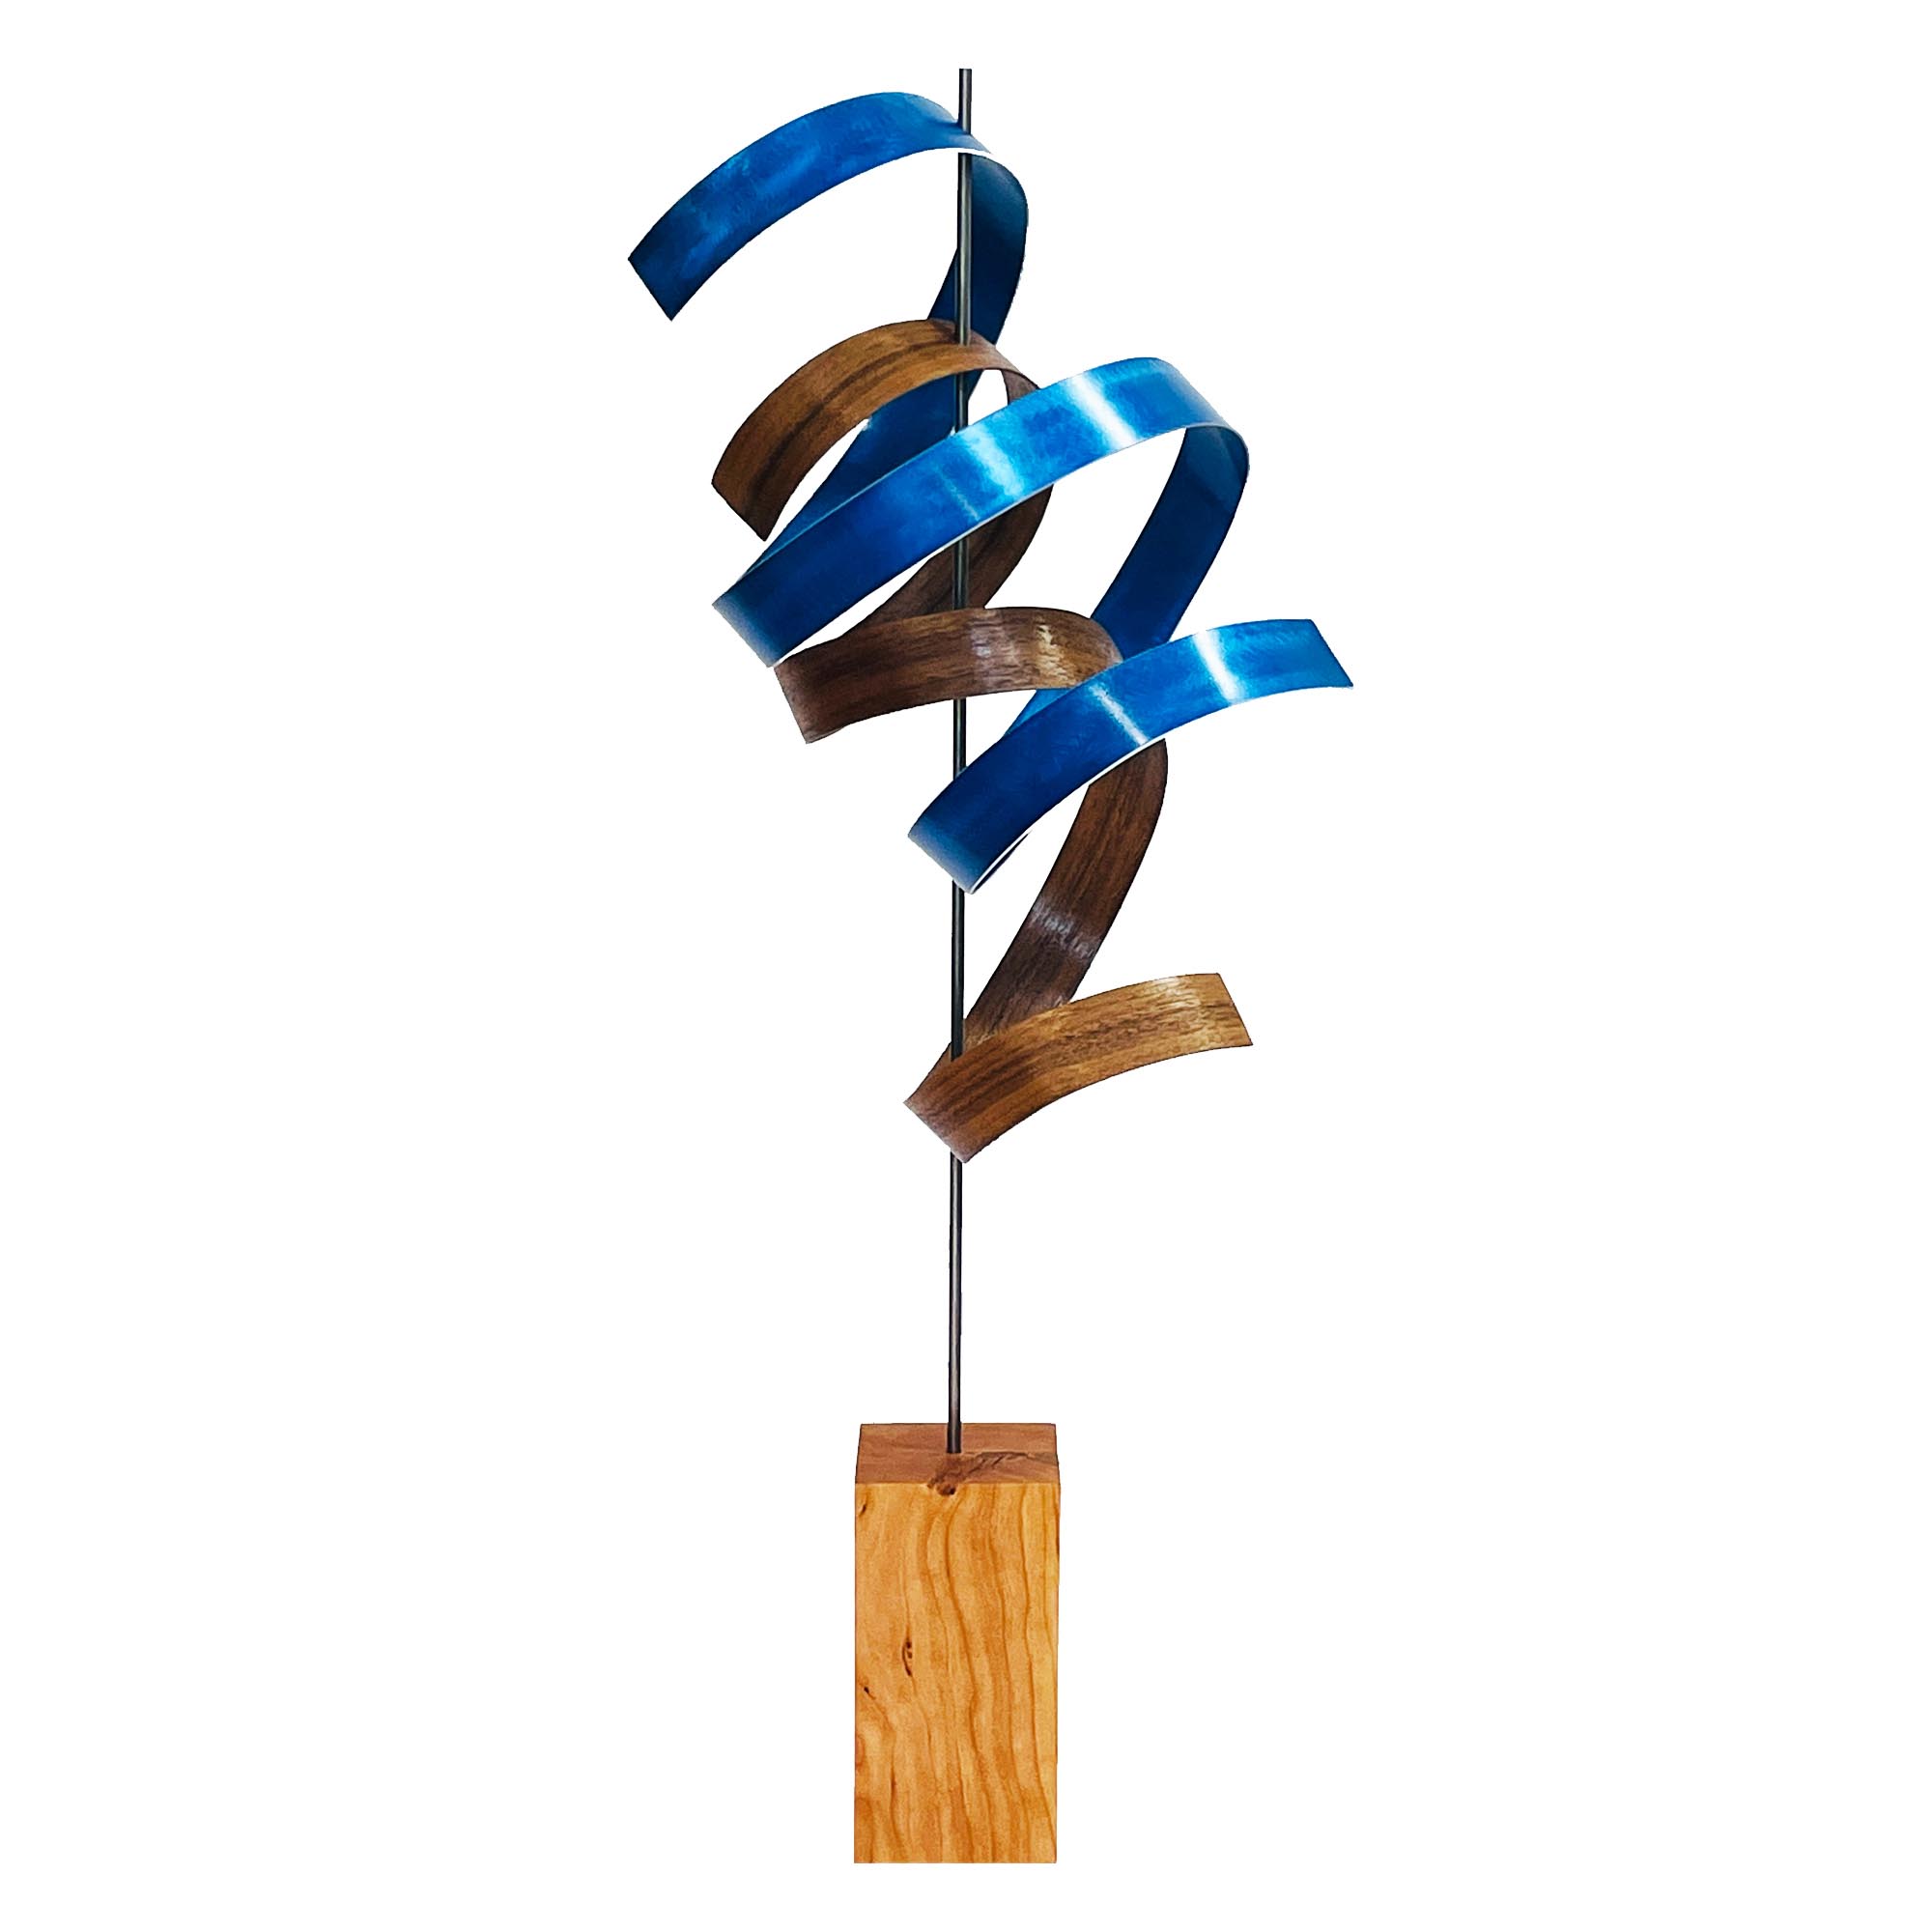 Jackson Wright 'Ribbon Cherry' 13in x 32in Contemporary Style Abstract Wood Sculpture